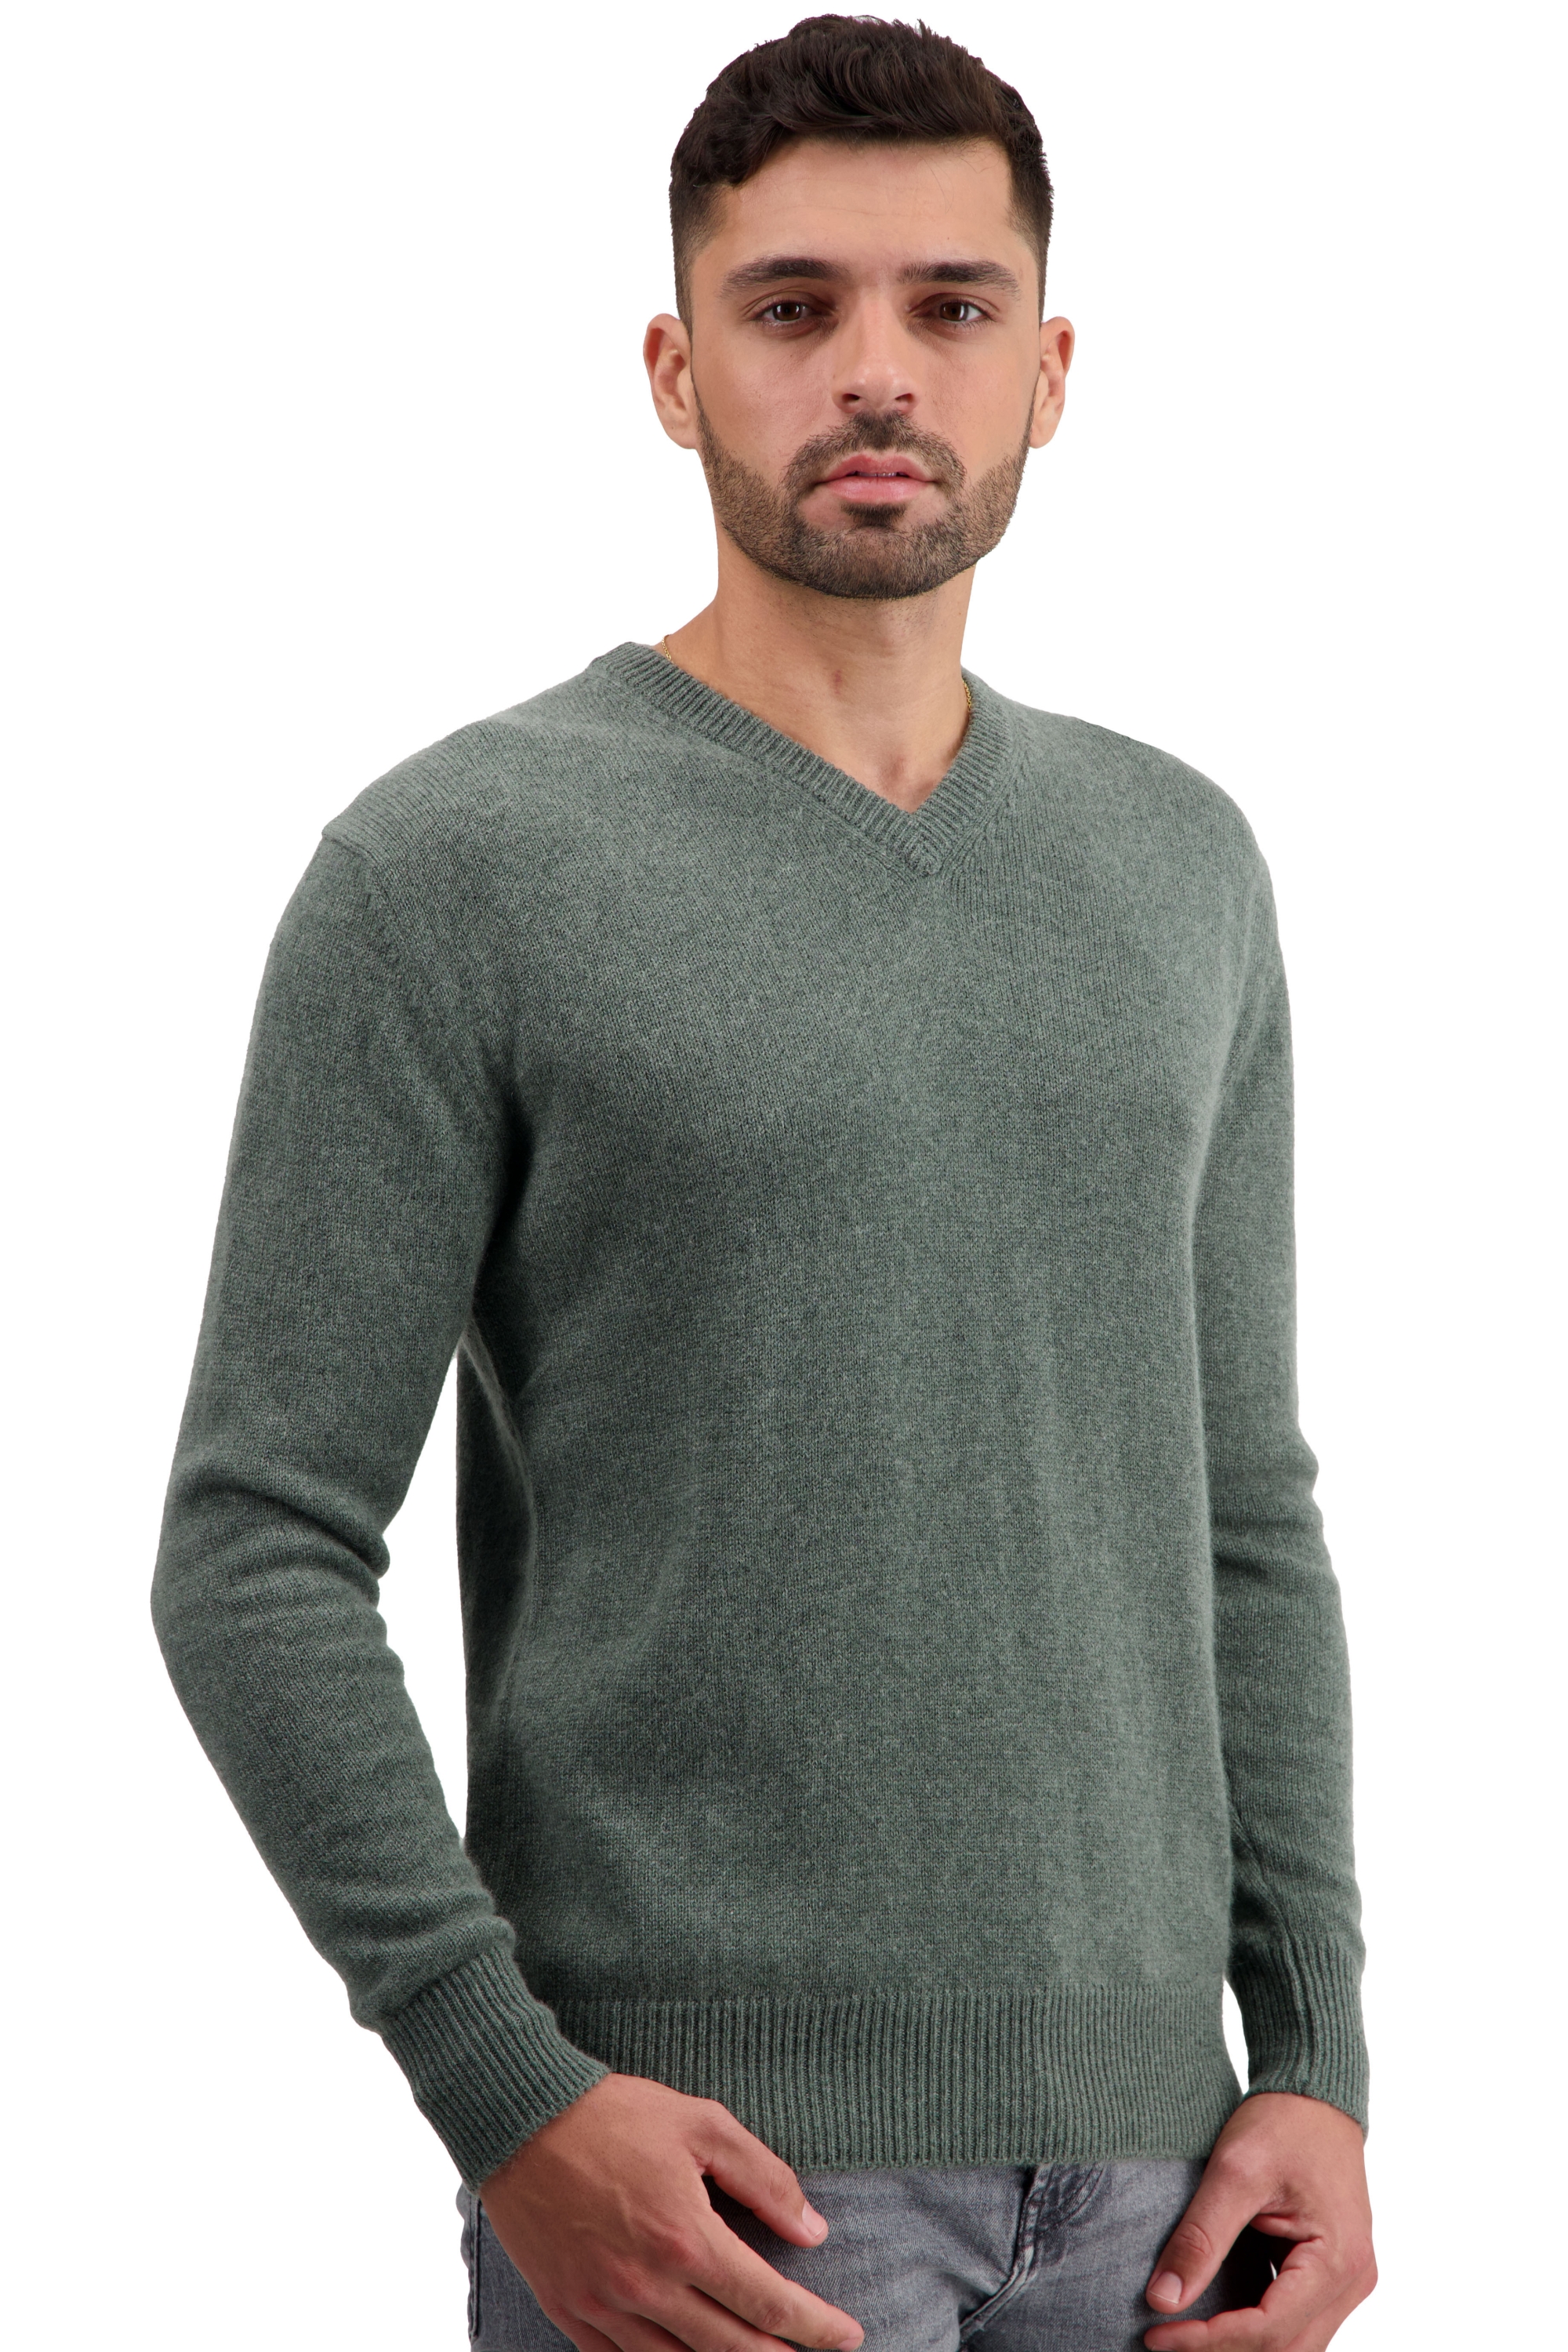 Cashmere men basic sweaters at low prices tour first military green xl